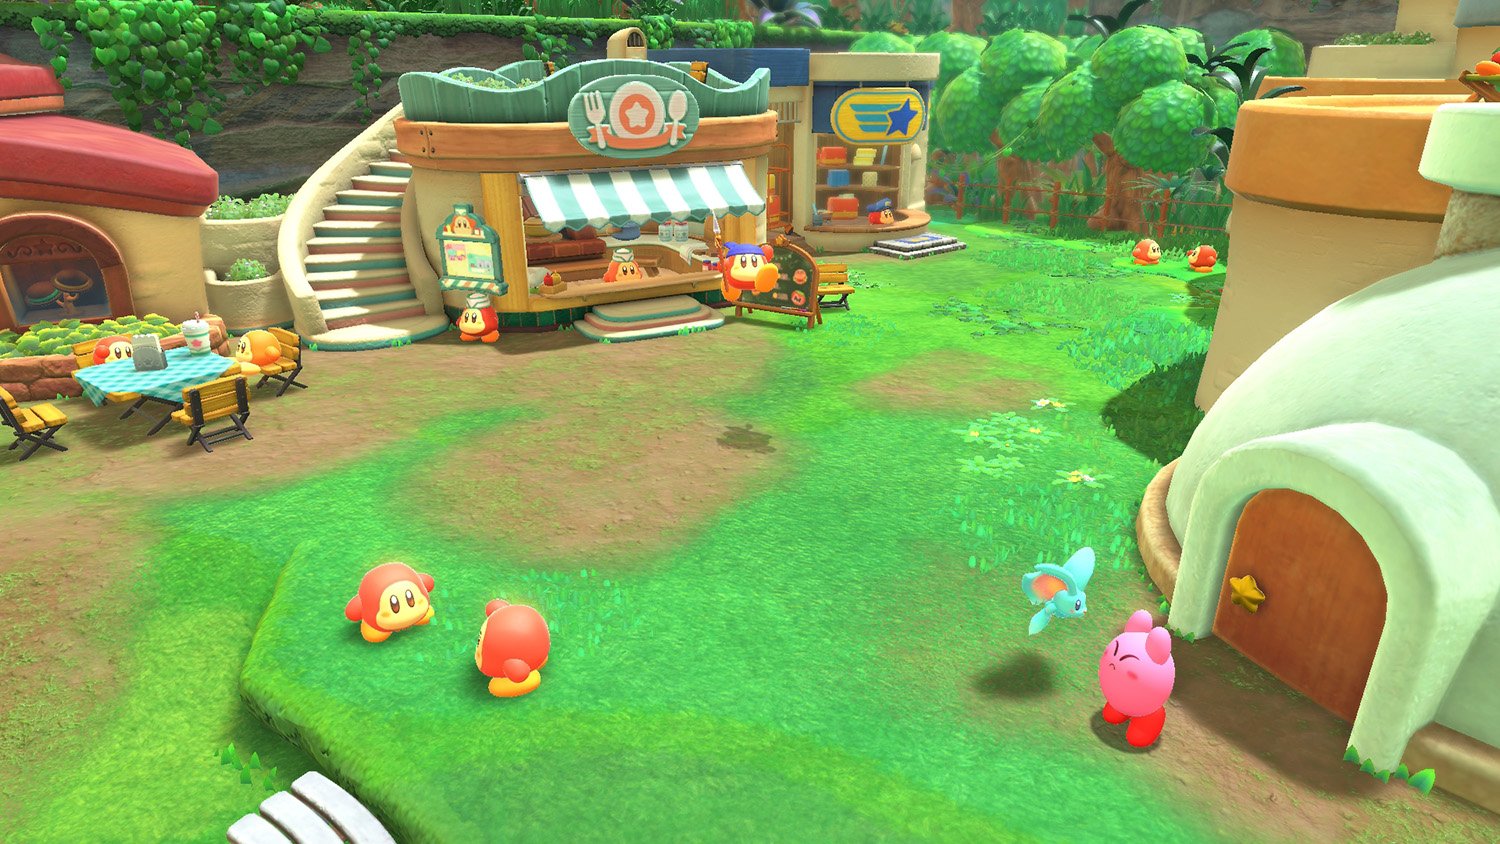 Waddle Dee Town, which has several hidden present codes, in Kirby and the Forgotten Land